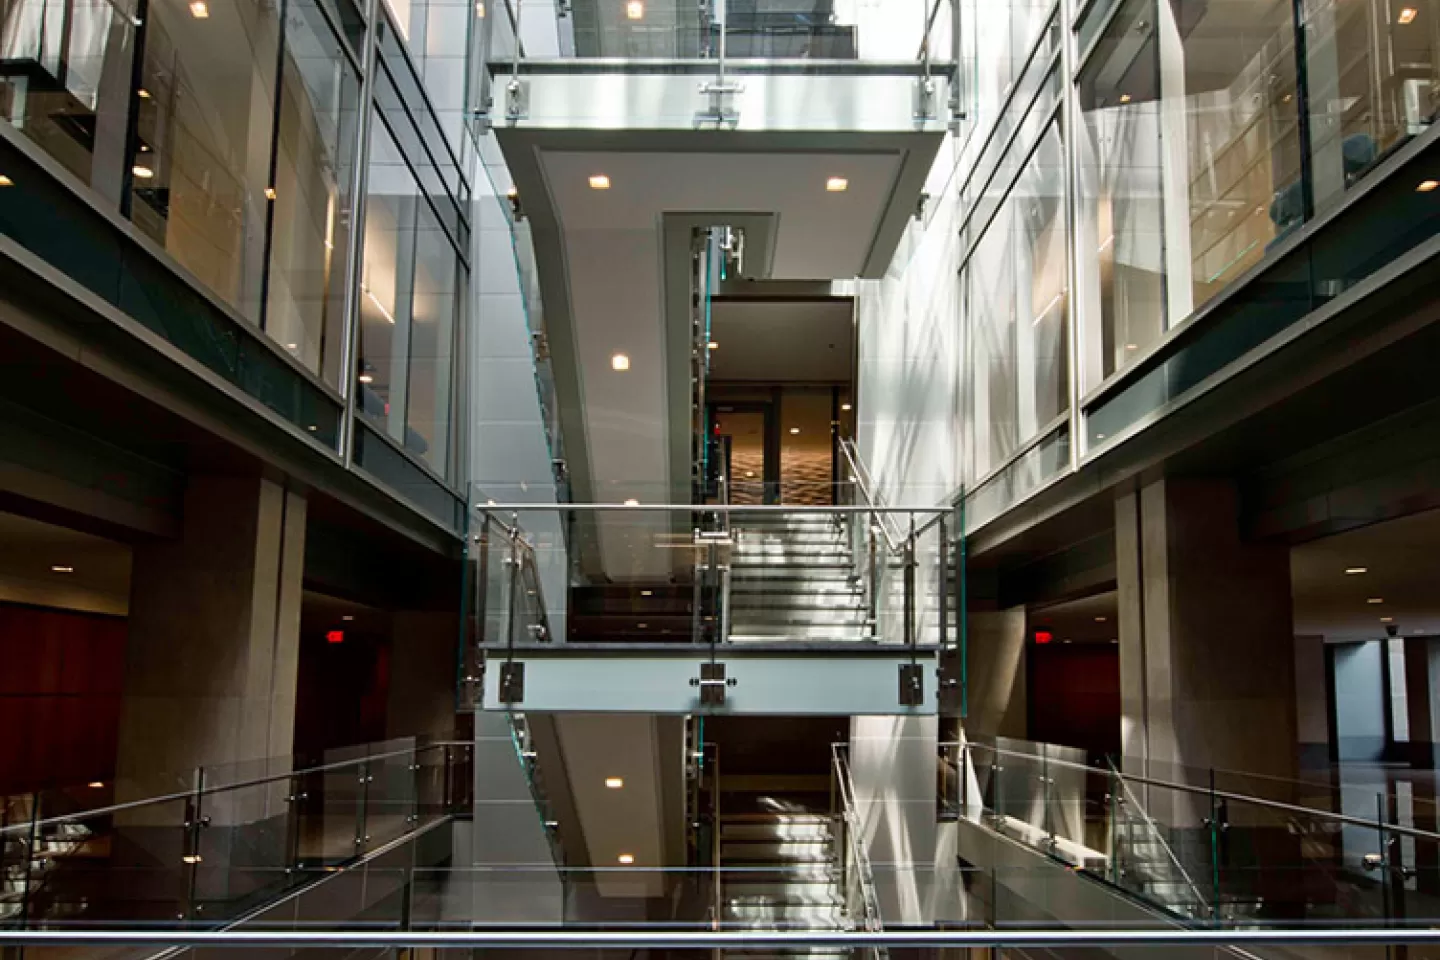 The renovation of the O'Neill Building modernized the facility and added an abundance of natural light.